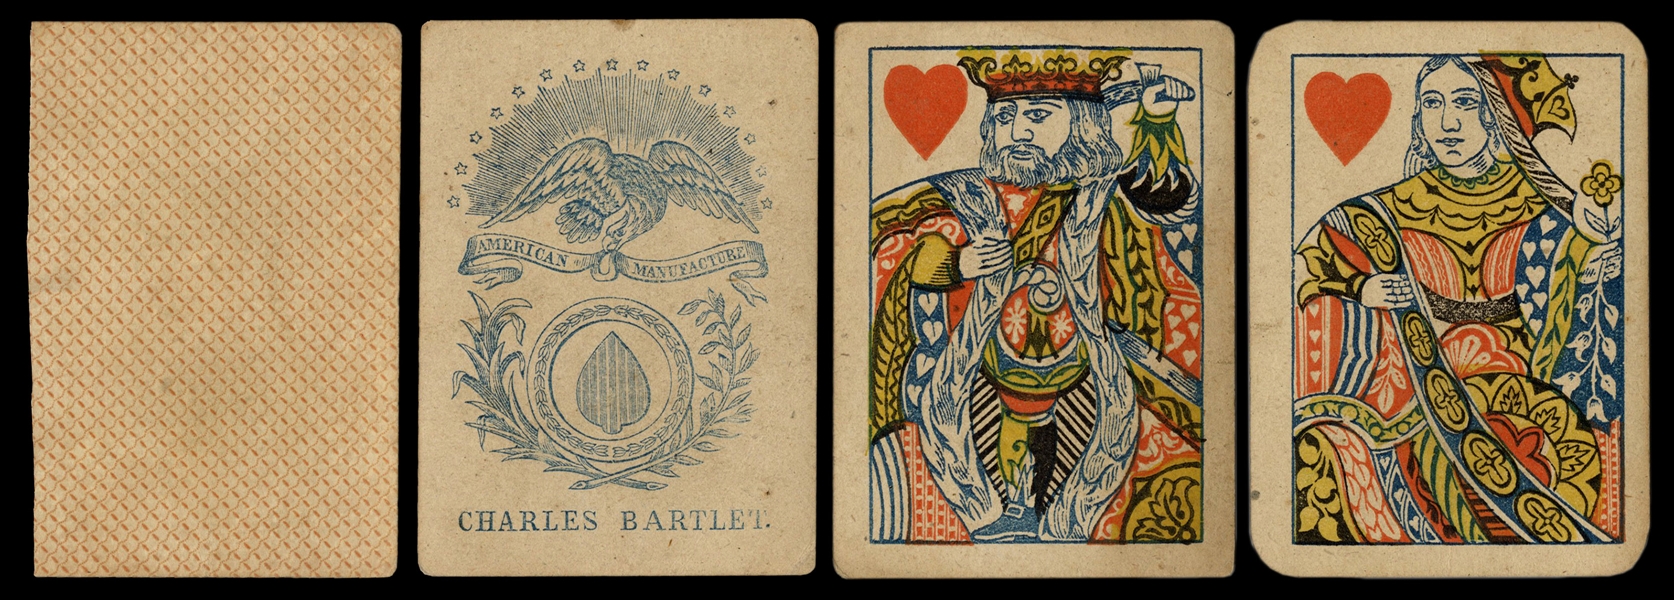  Charles Bartlet American Manufacture Playing Cards. Philade...